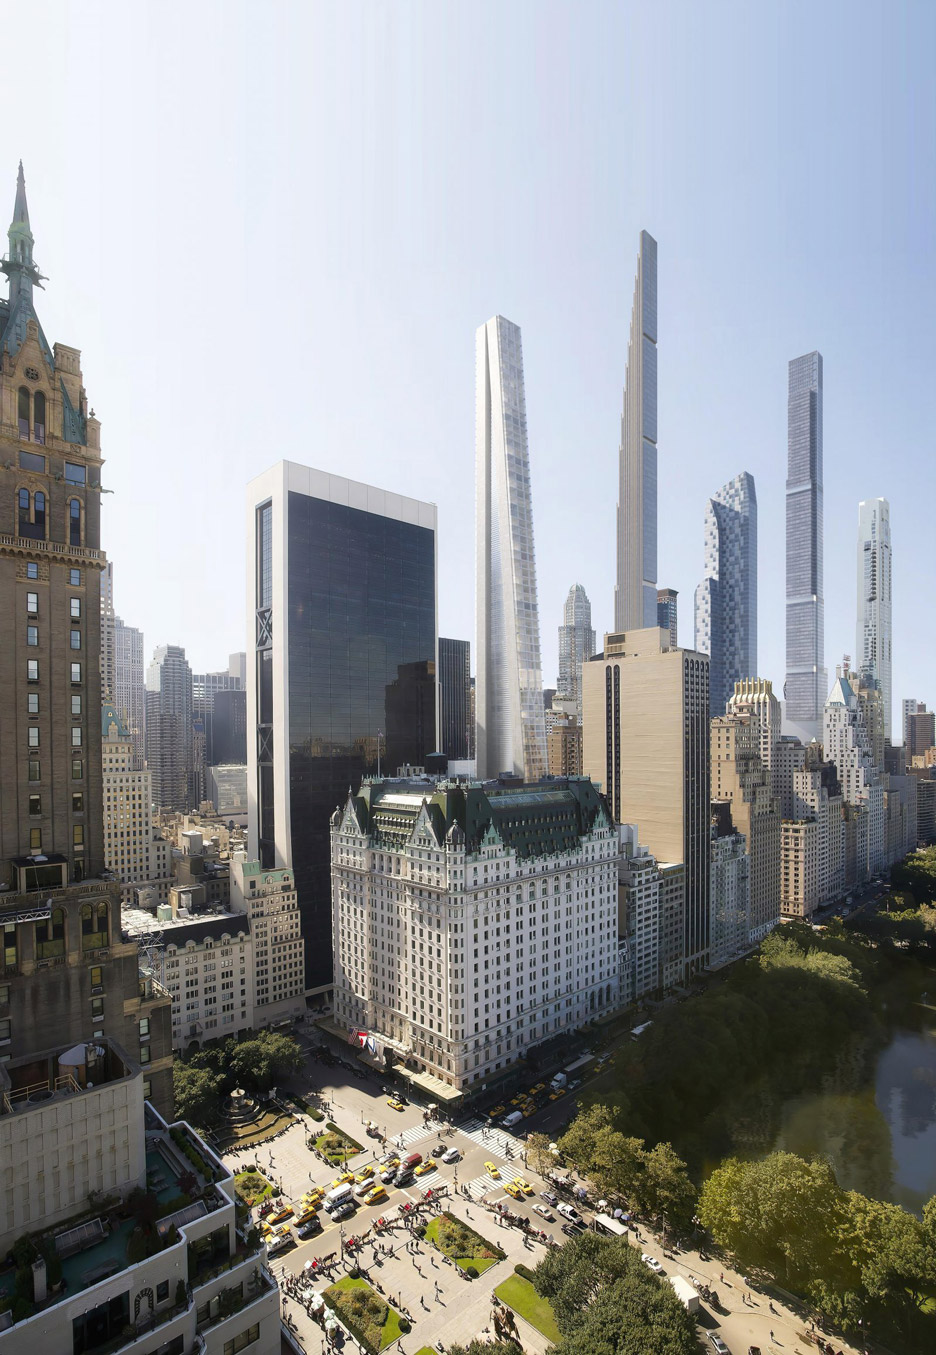 Render of a New York supertall skyscraper by OMA